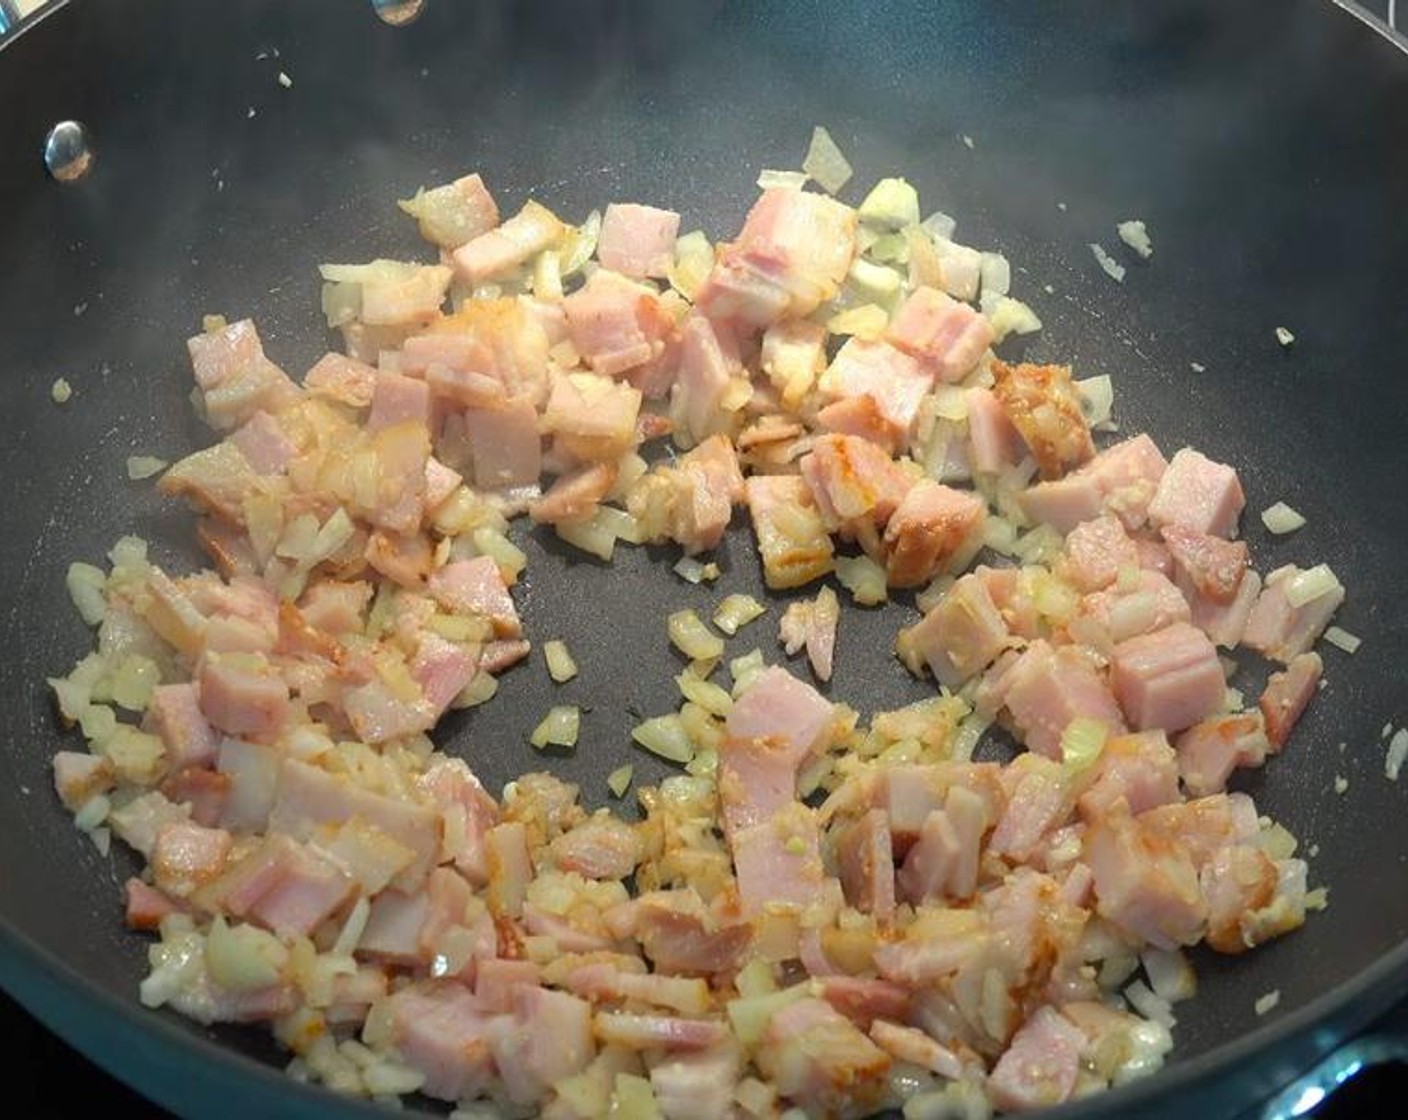 step 1 In a large fry pan over medium-high heat, add Bacon (6 slices), Onion (1), and Garlic (2 cloves). Stir for 1-2 minutes, or until onions start to soften and bacon has a bit of color.